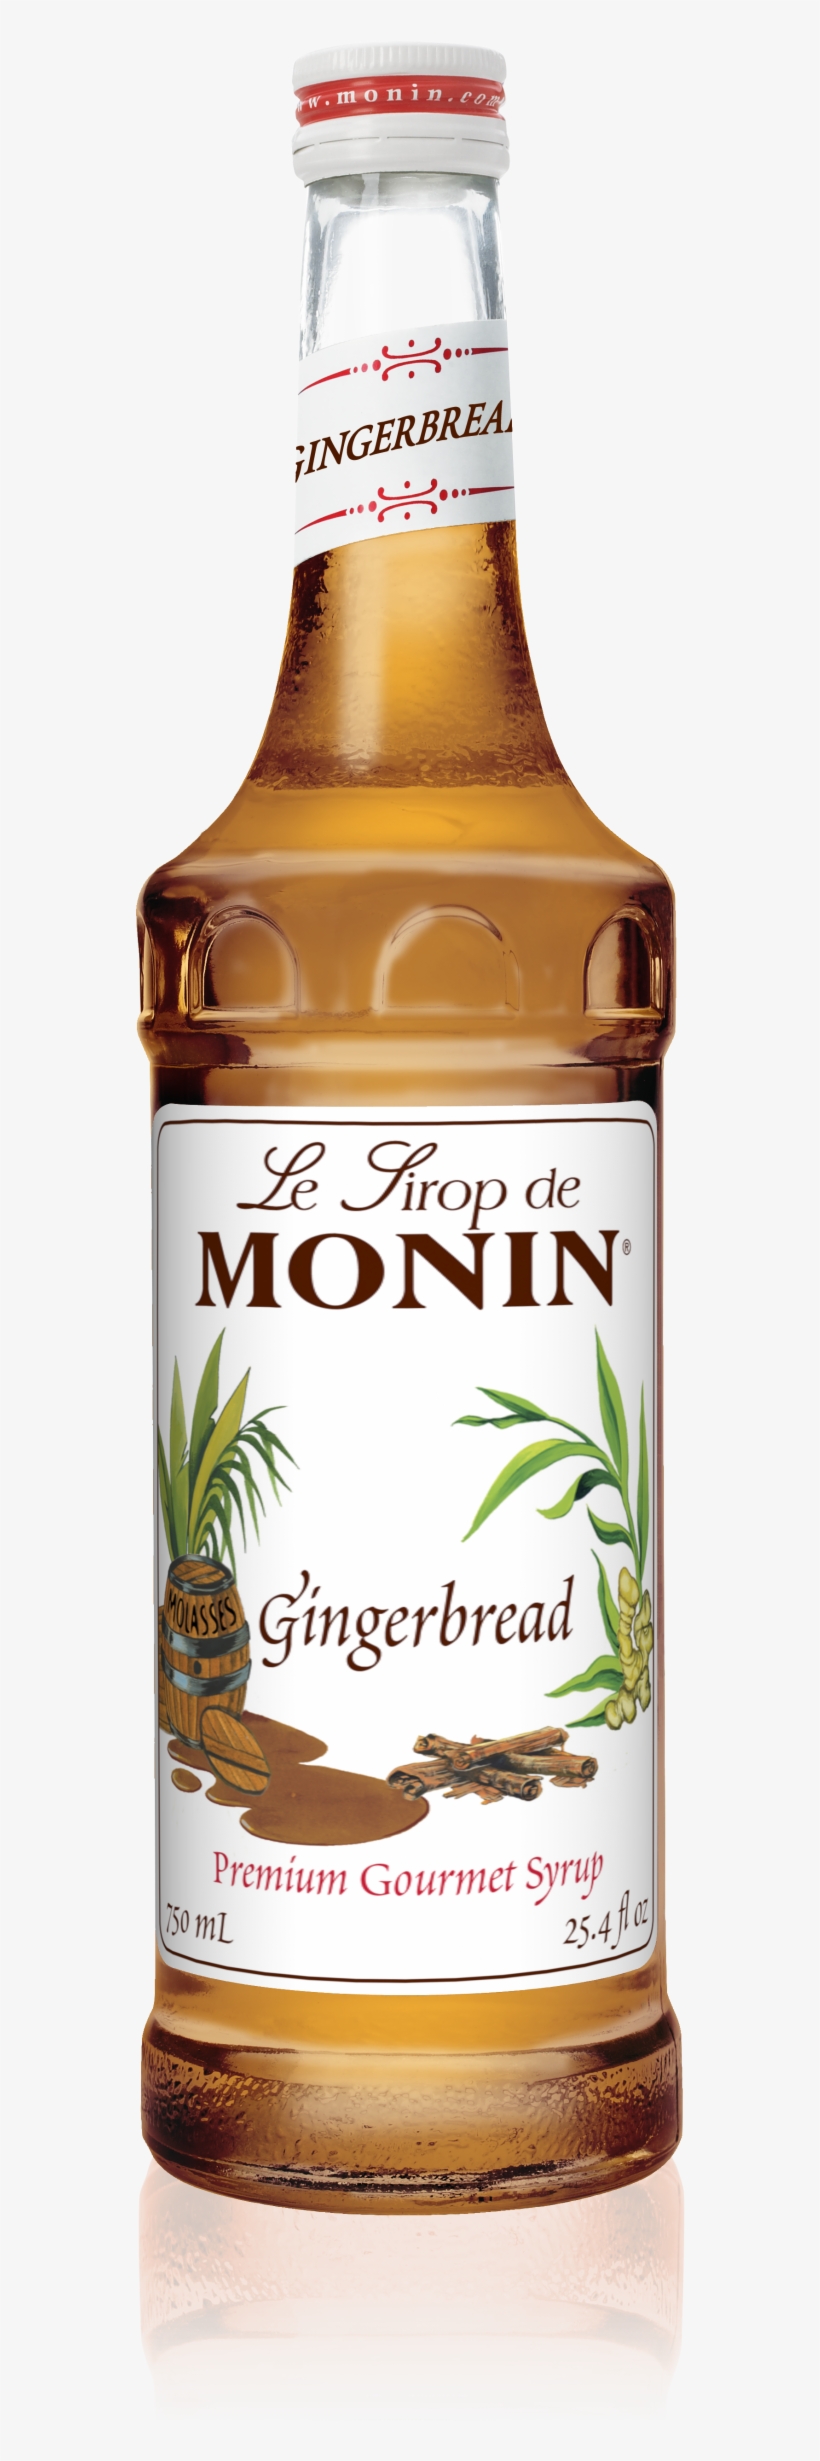 750 Ml Gingerbread Syrup - Monin 750 Ml Premium Gingerbread Flavoring Syrup, transparent png #2199667